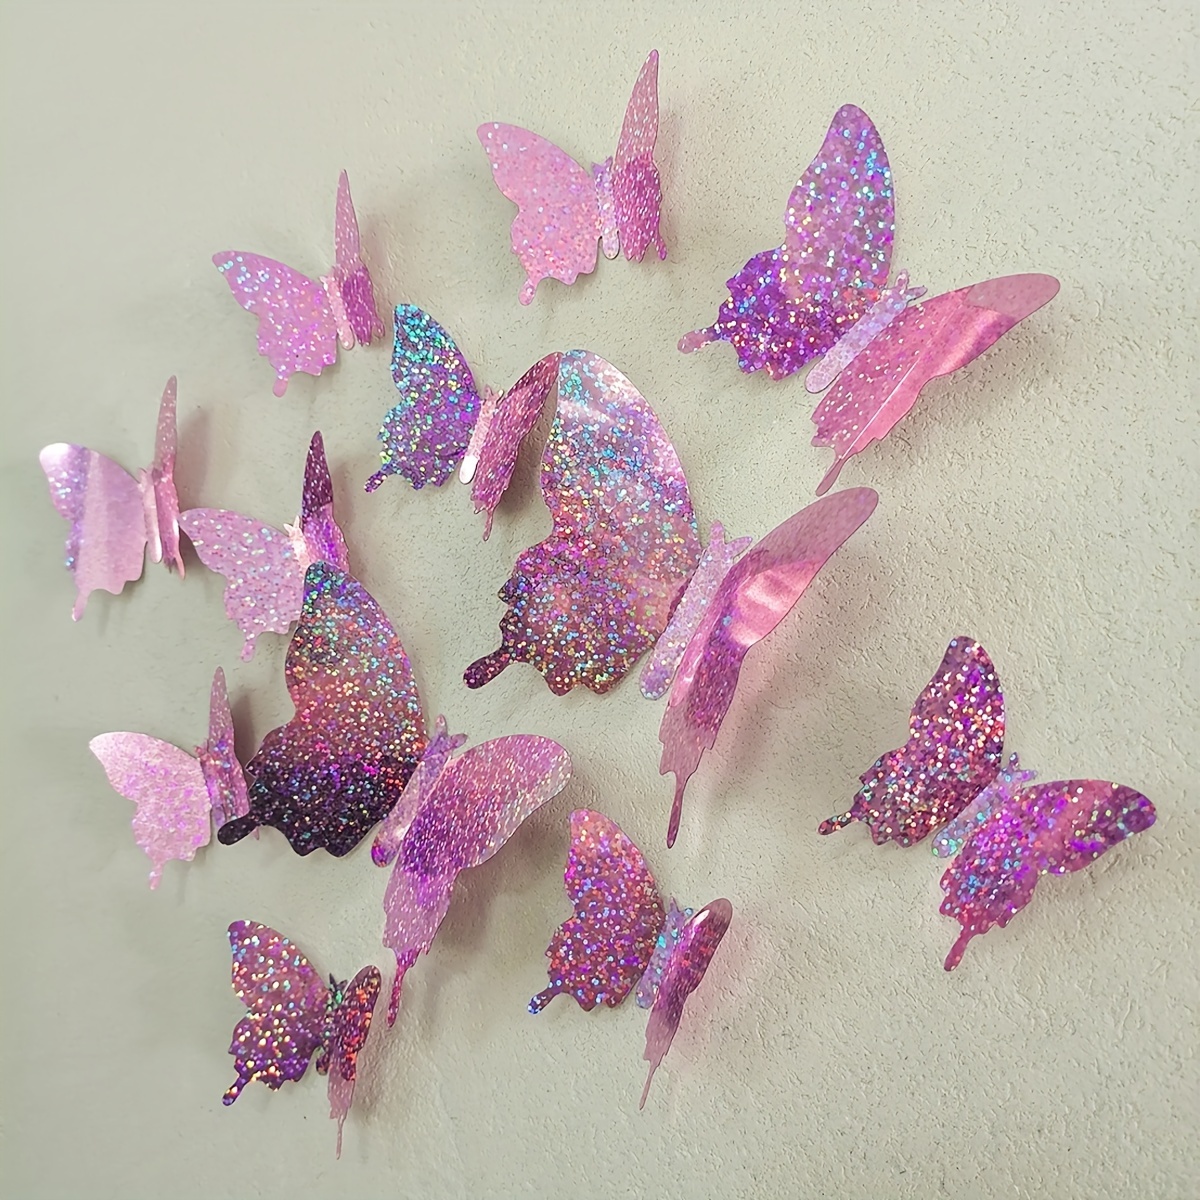 60pcs Butterfly Wall Decals - 3D Butterflies Decor for Wall Removable Mural Stickers Home Decoration Kids Room Bedroom Decor (Pink)